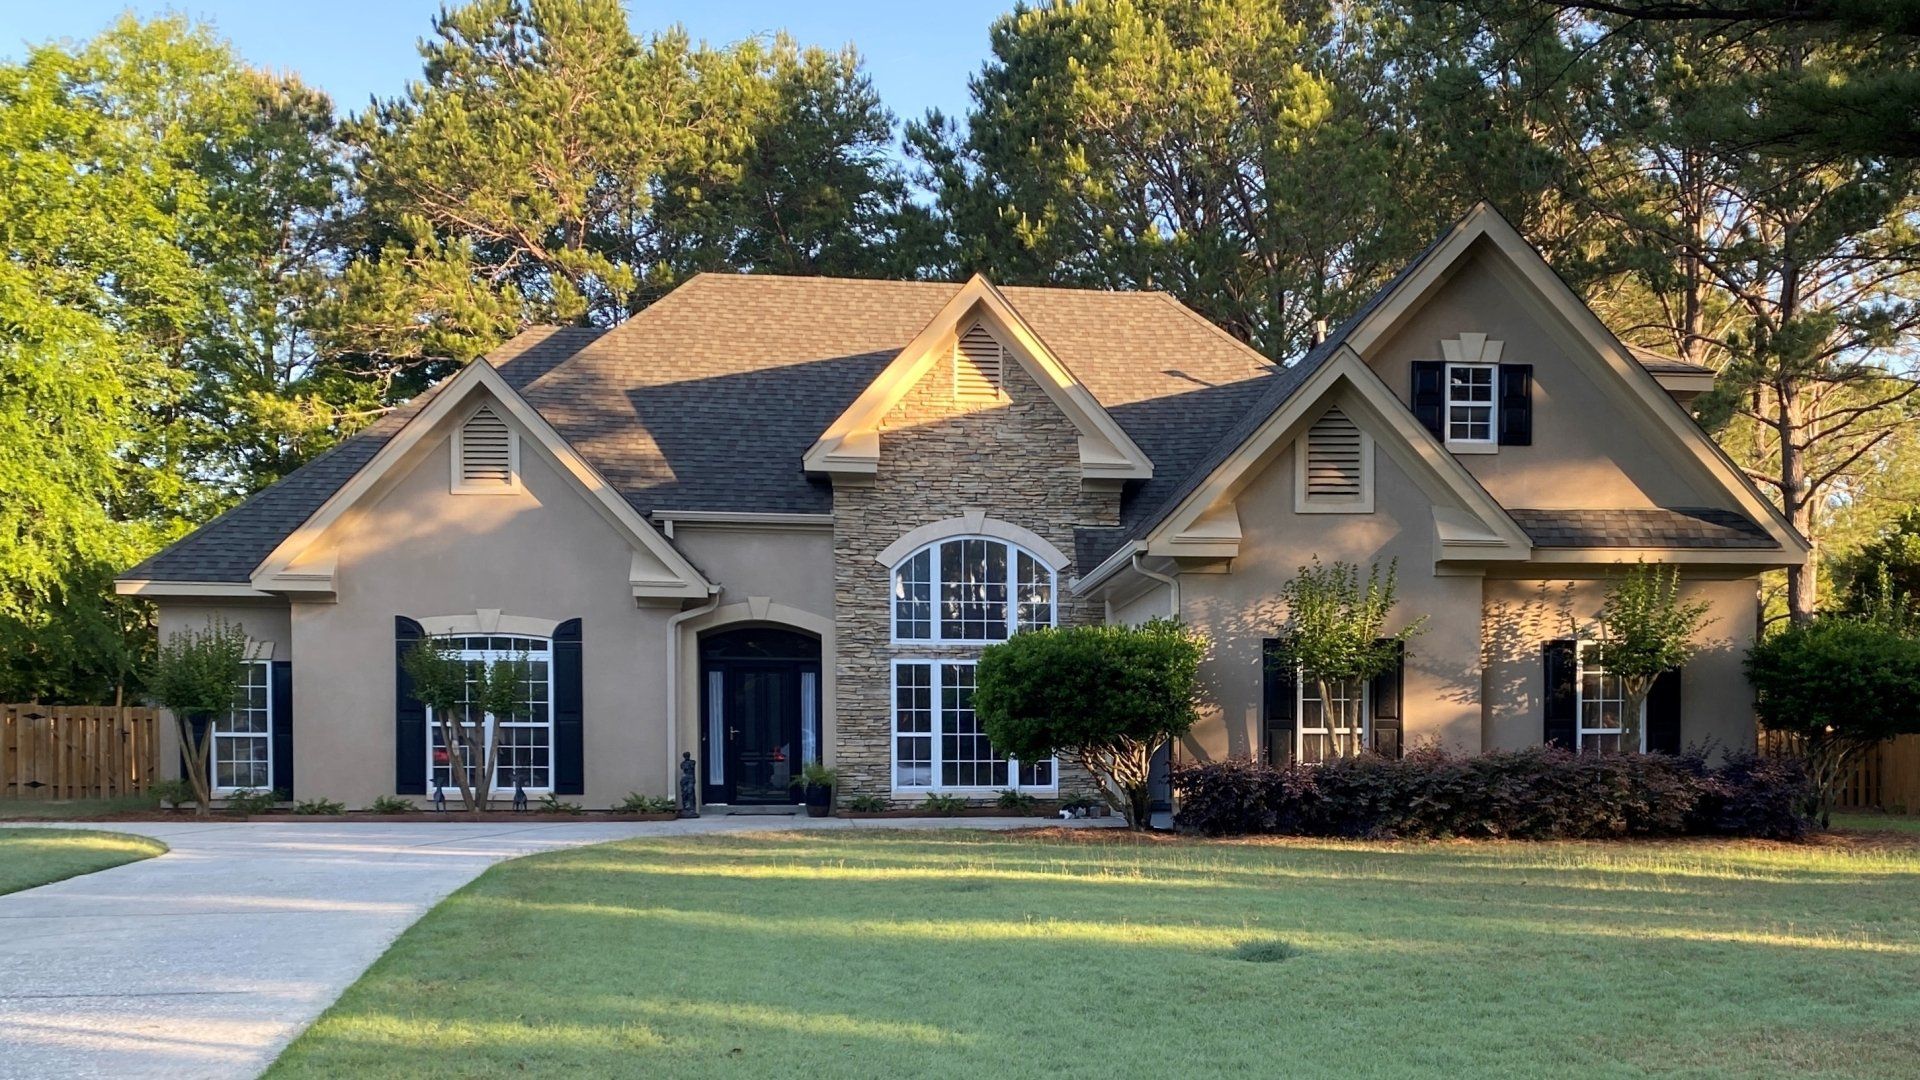 Save power - SPF Lt Rose Platinum Shielded Unmatched Heat for a residential window tint option allowing this much light to remain inside. Deer Creek AL